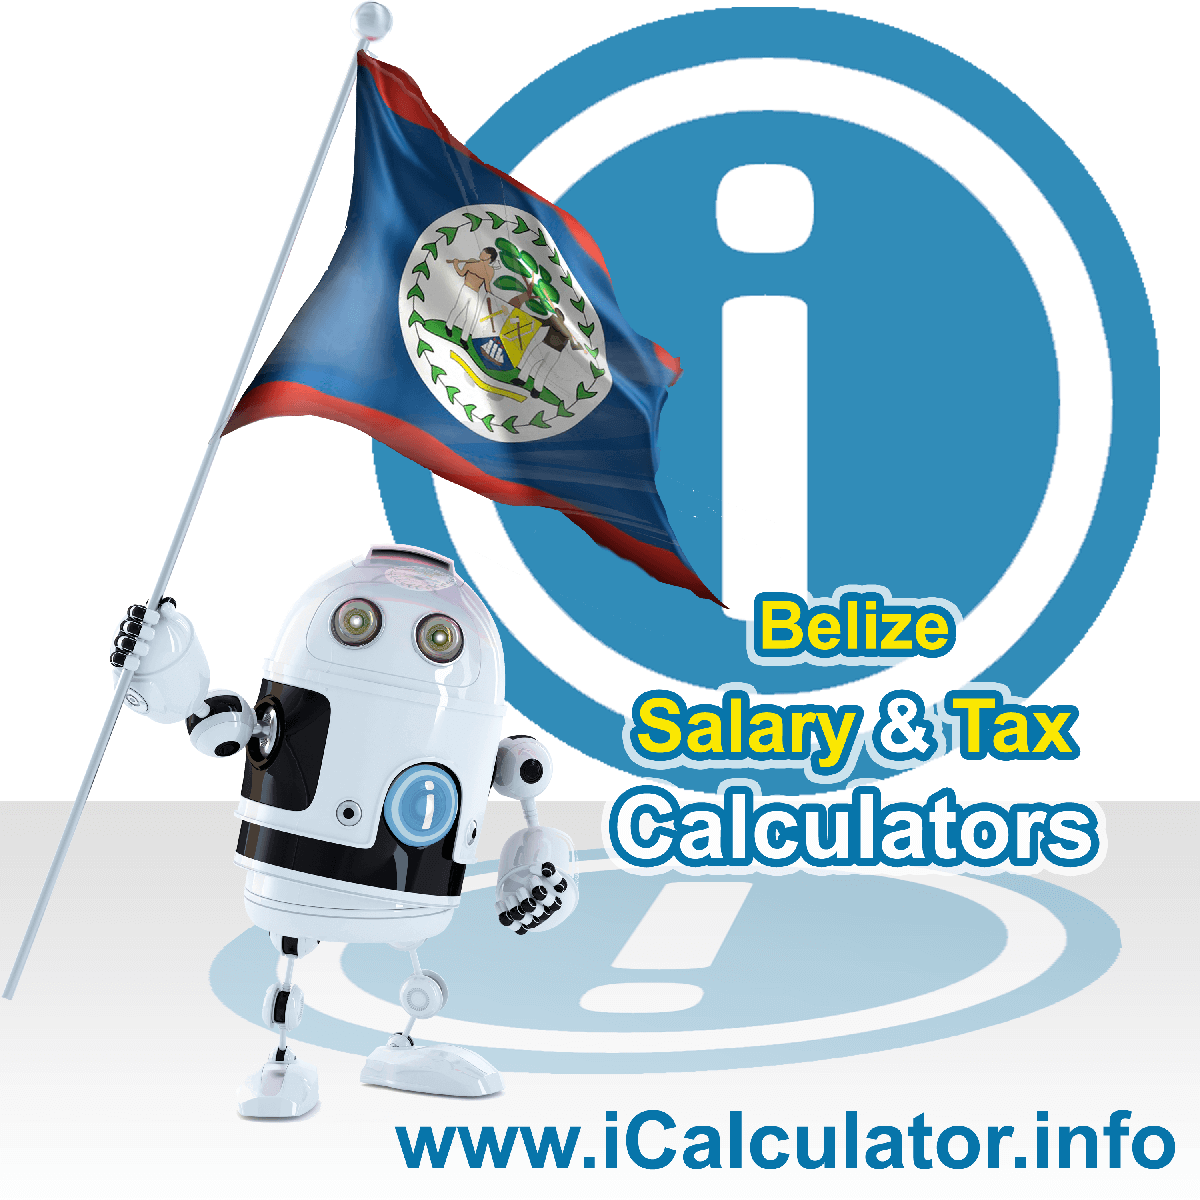 Belize Tax Calculator. This image shows the Belize flag and information relating to the tax formula for the Belize Salary Calculator